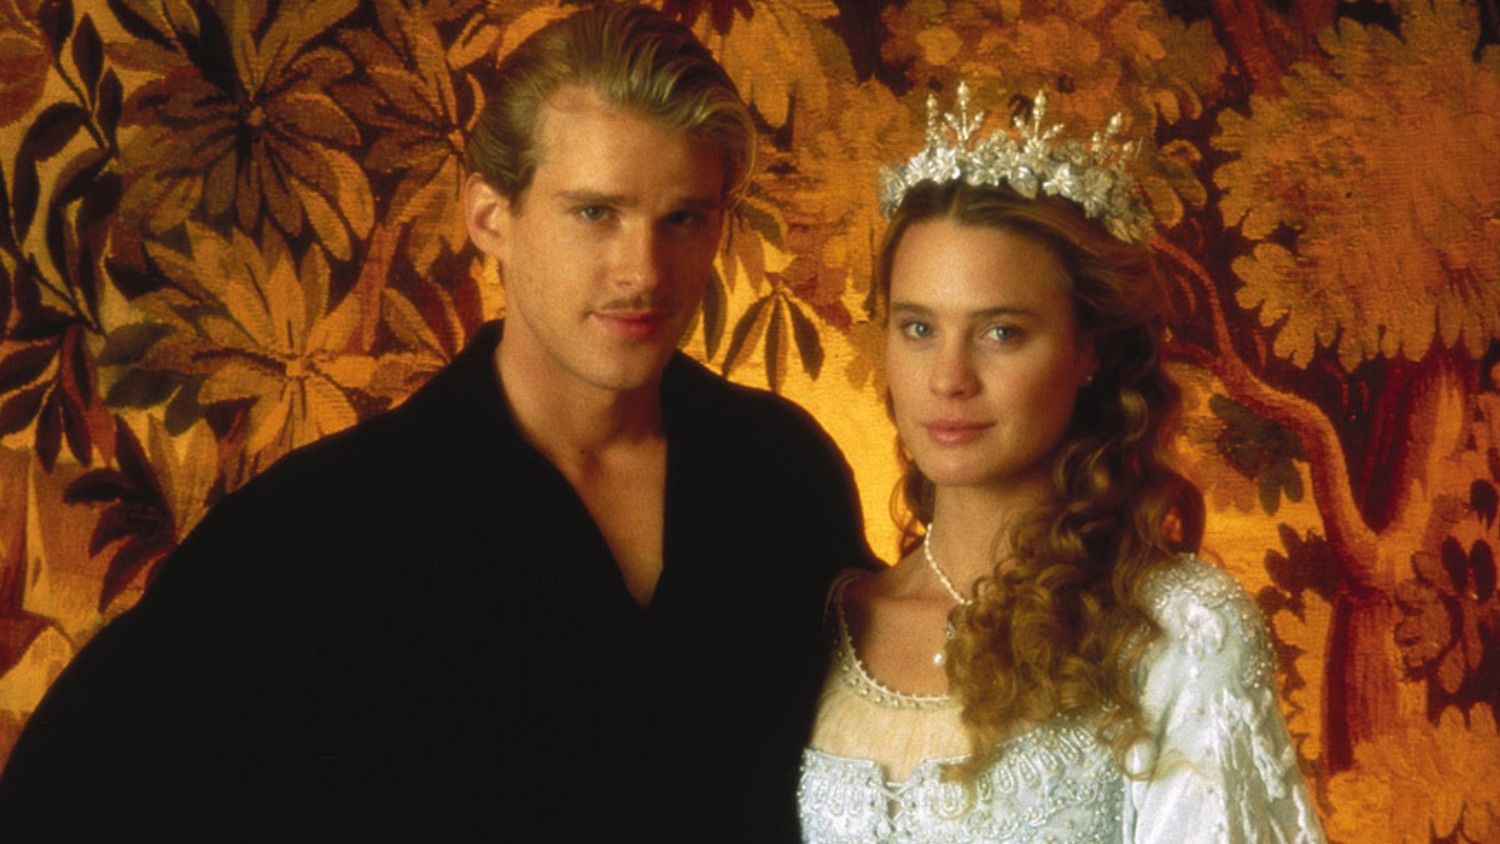 53 HQ Photos Princess Cut Movie Ending : Princess Bride Director Rob Reiner Reveals The Ending They Cut From The Movie